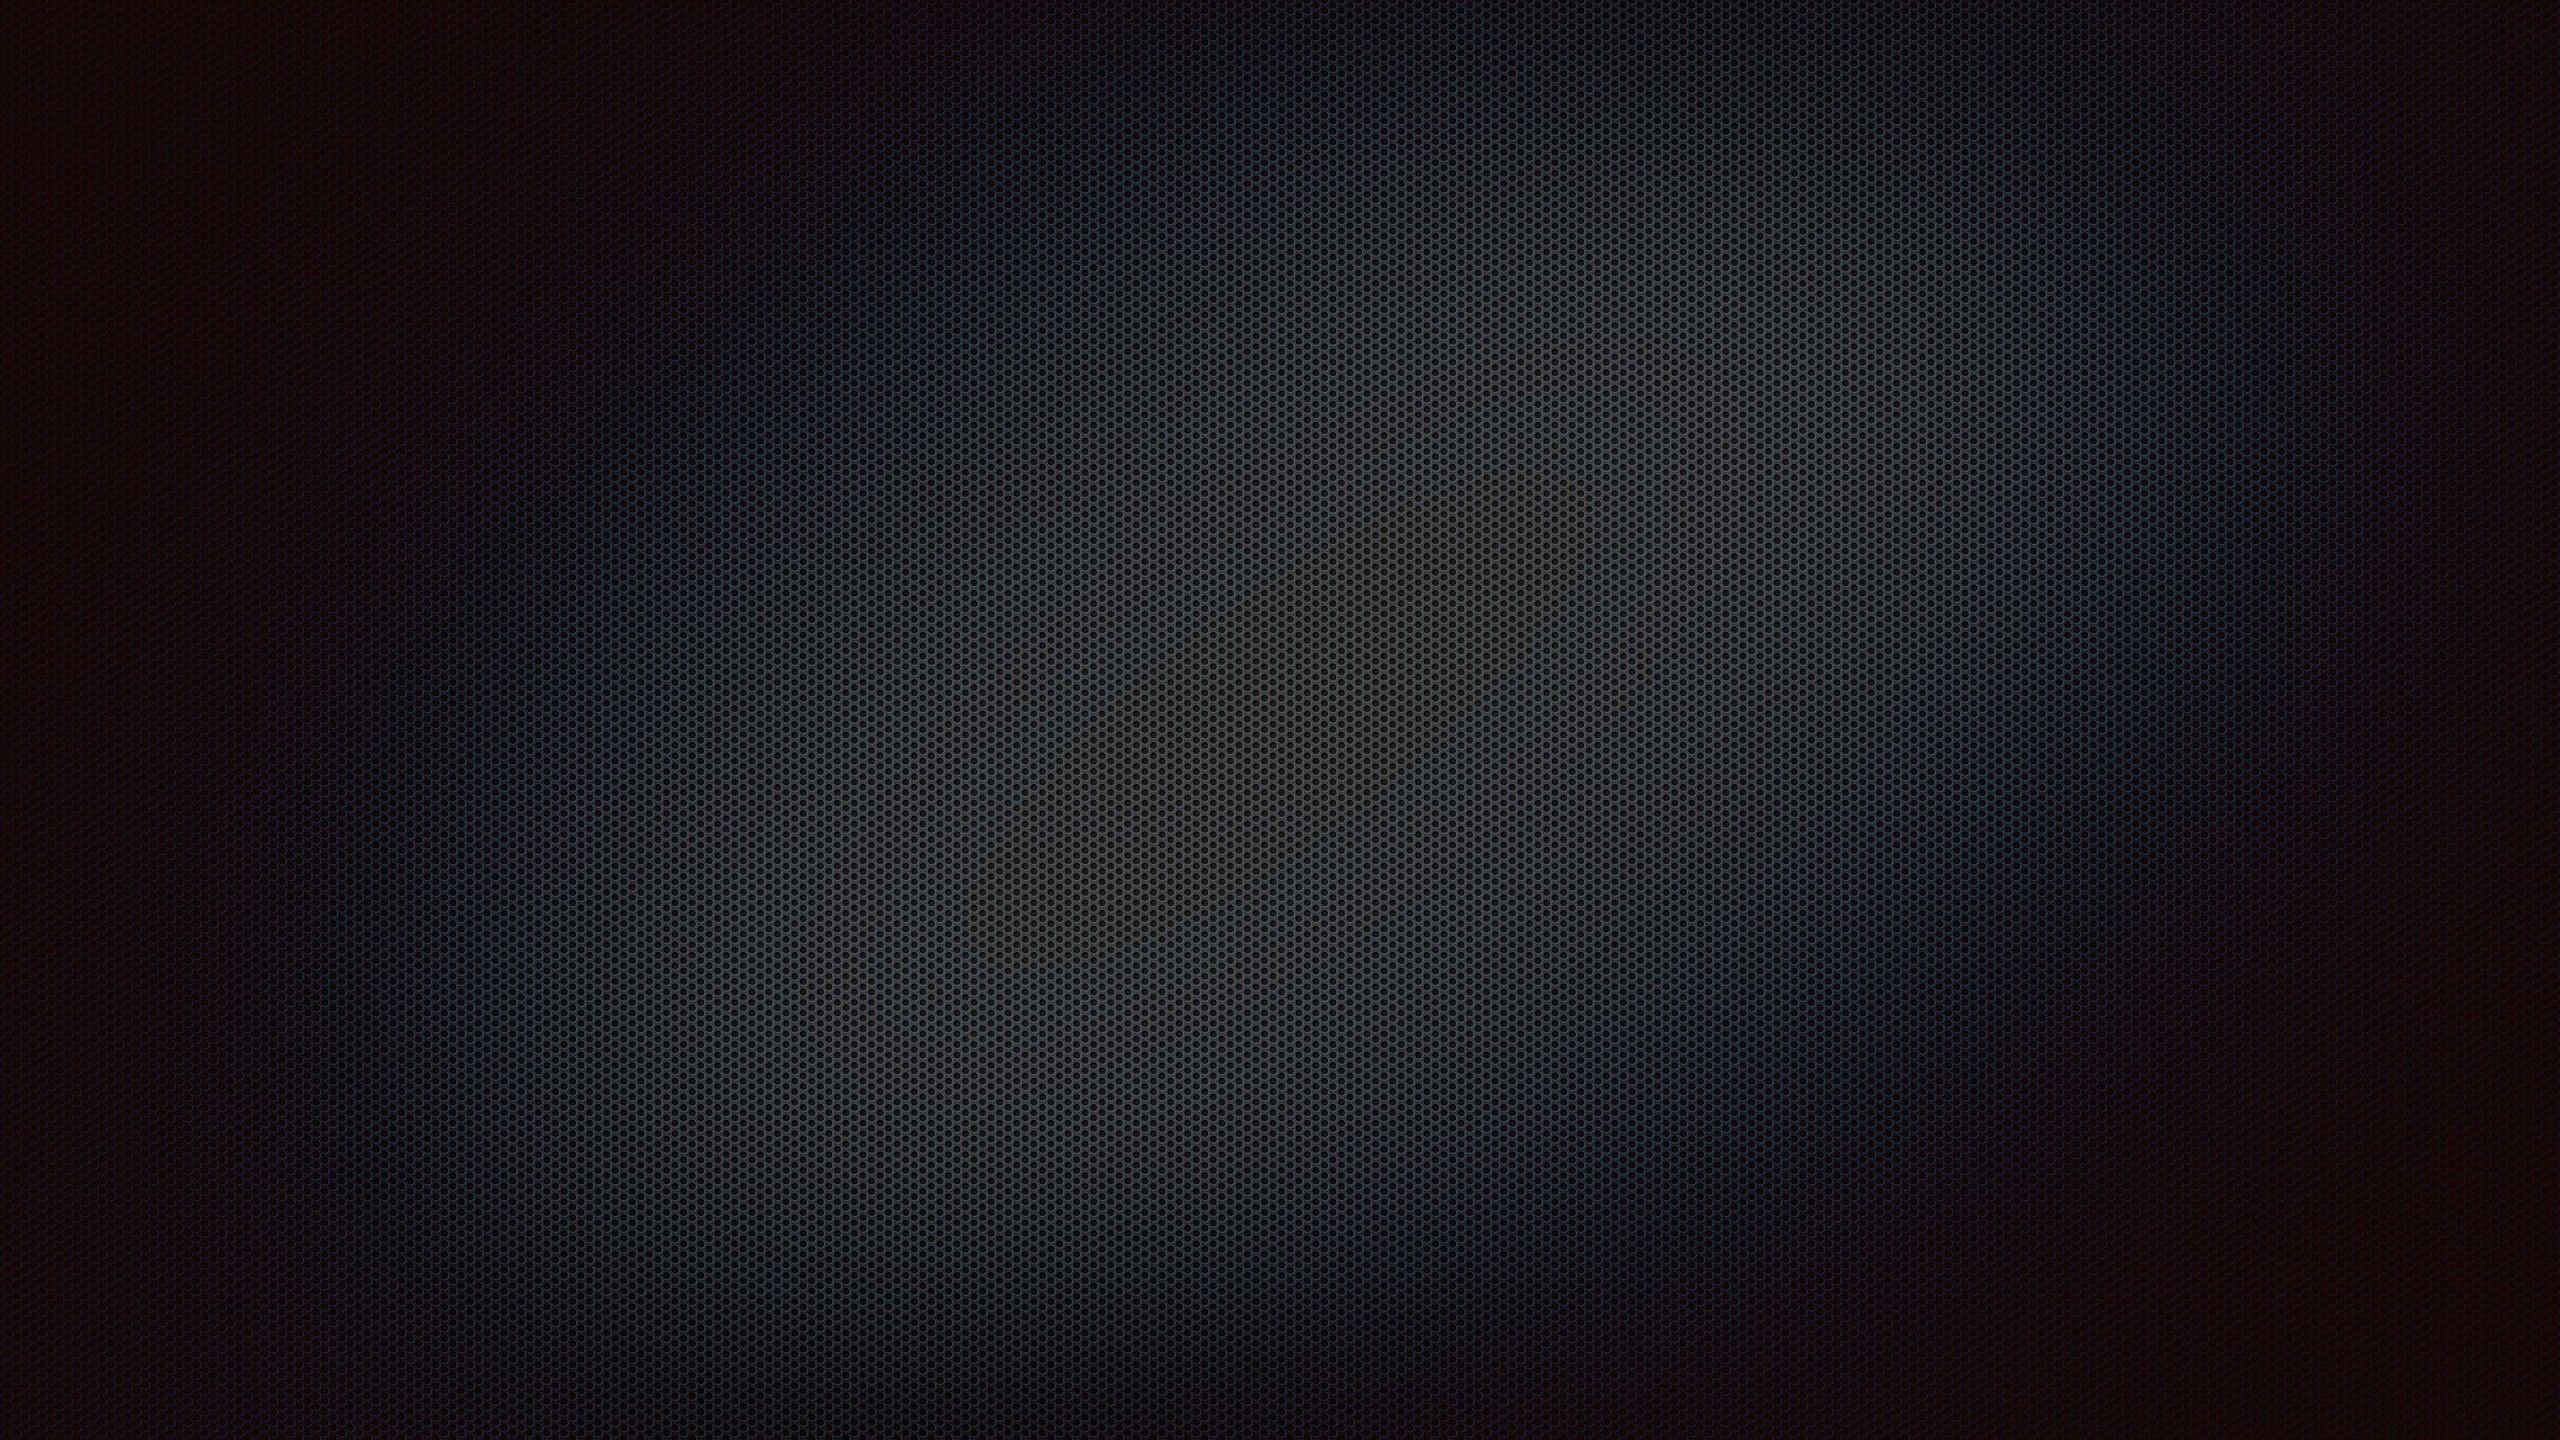 youtube channel art backgrounds 2560x1440